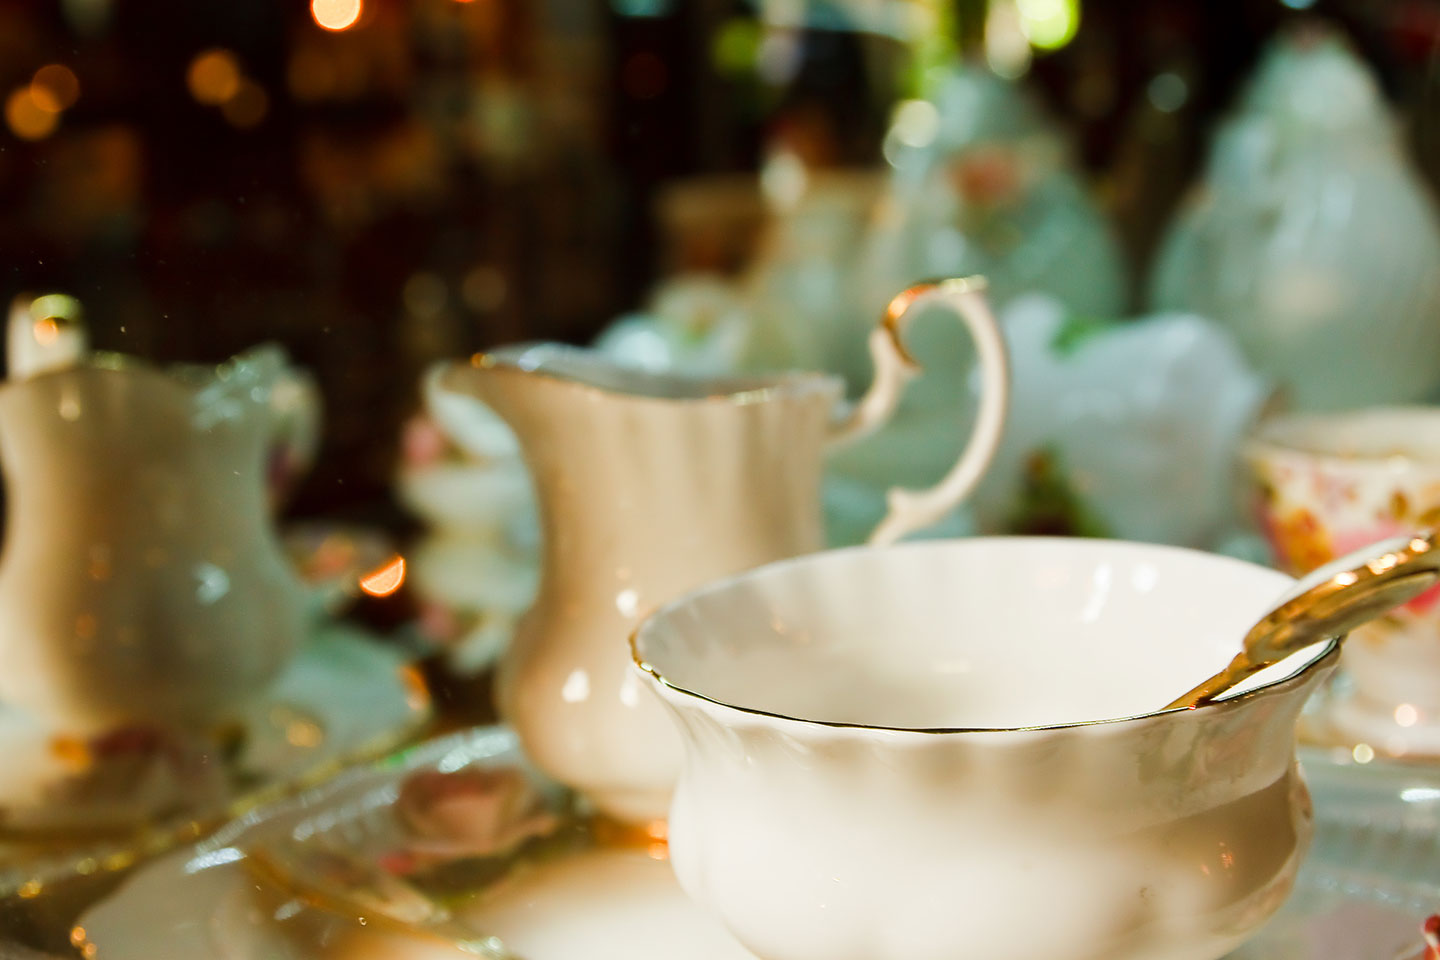 Afternoon tea: How to do the convivial tradition right?